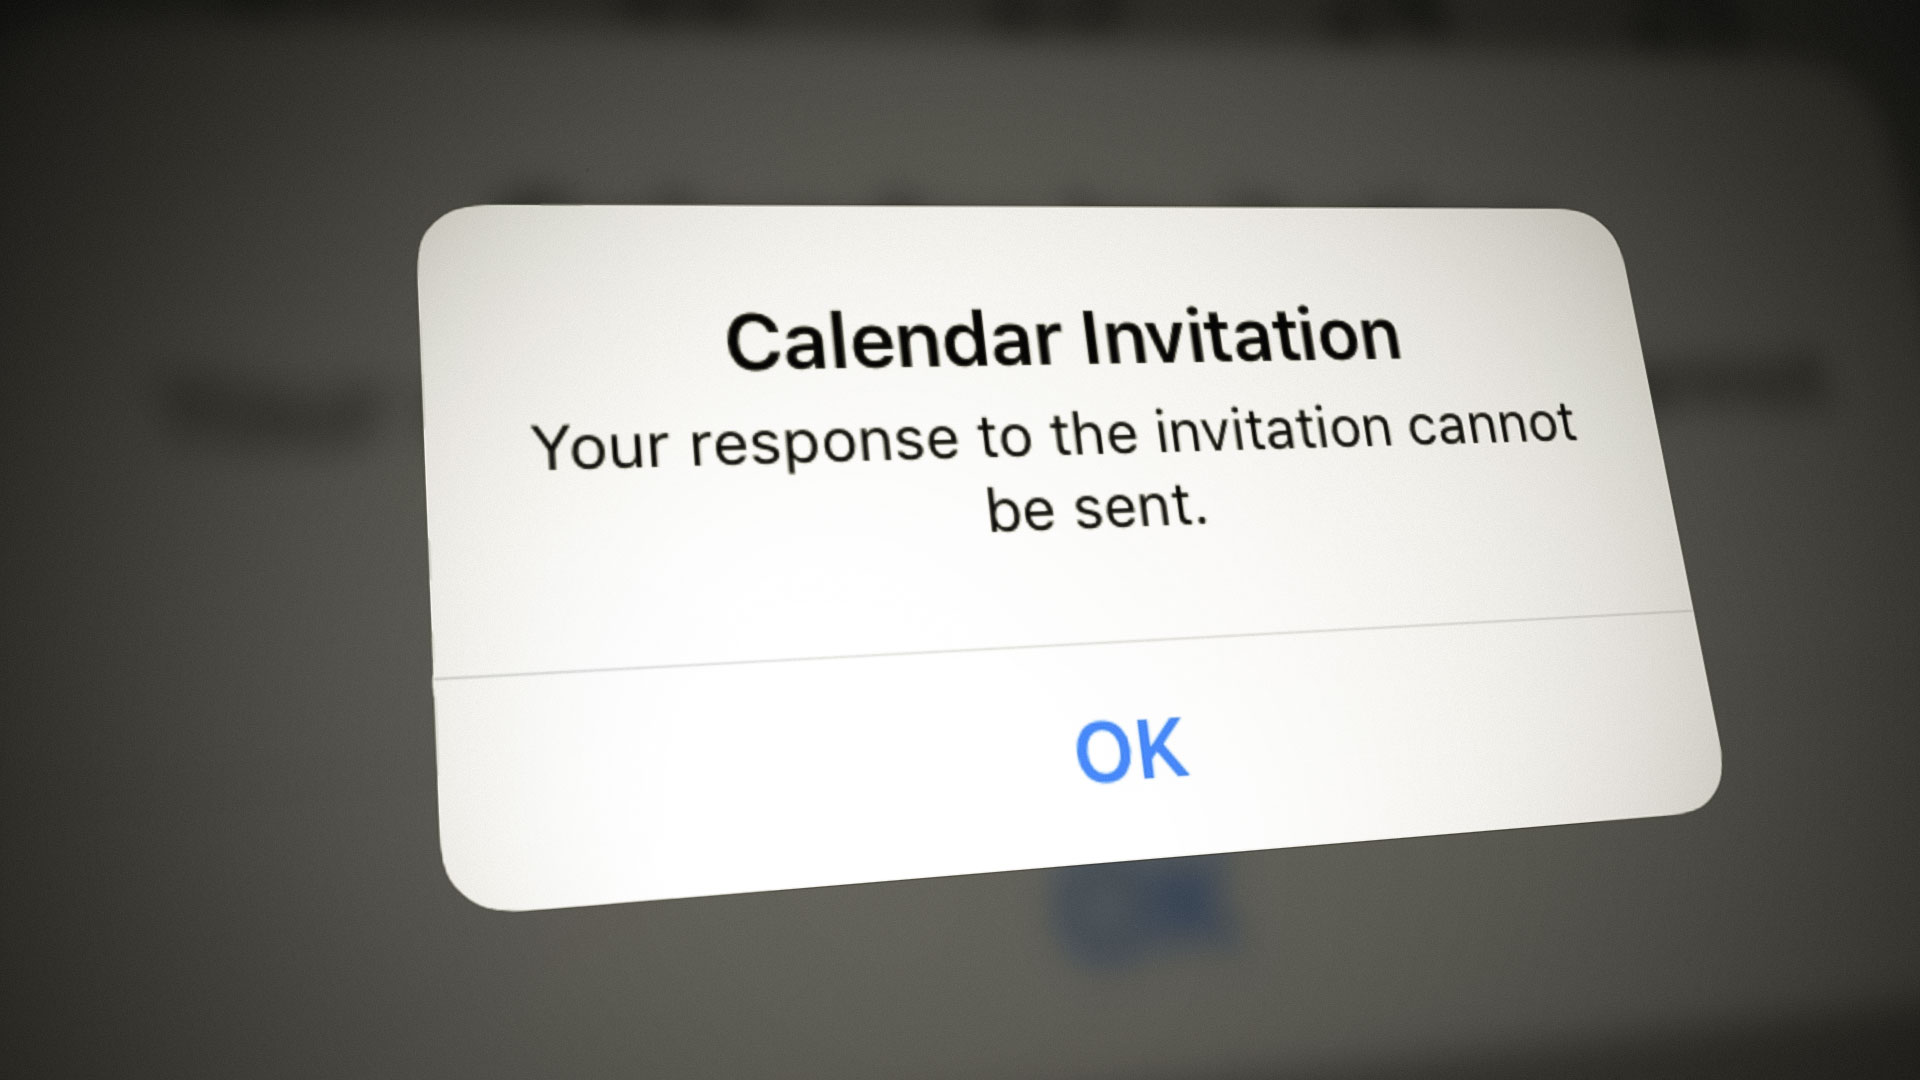 Your Response to the invitation cannot be sent